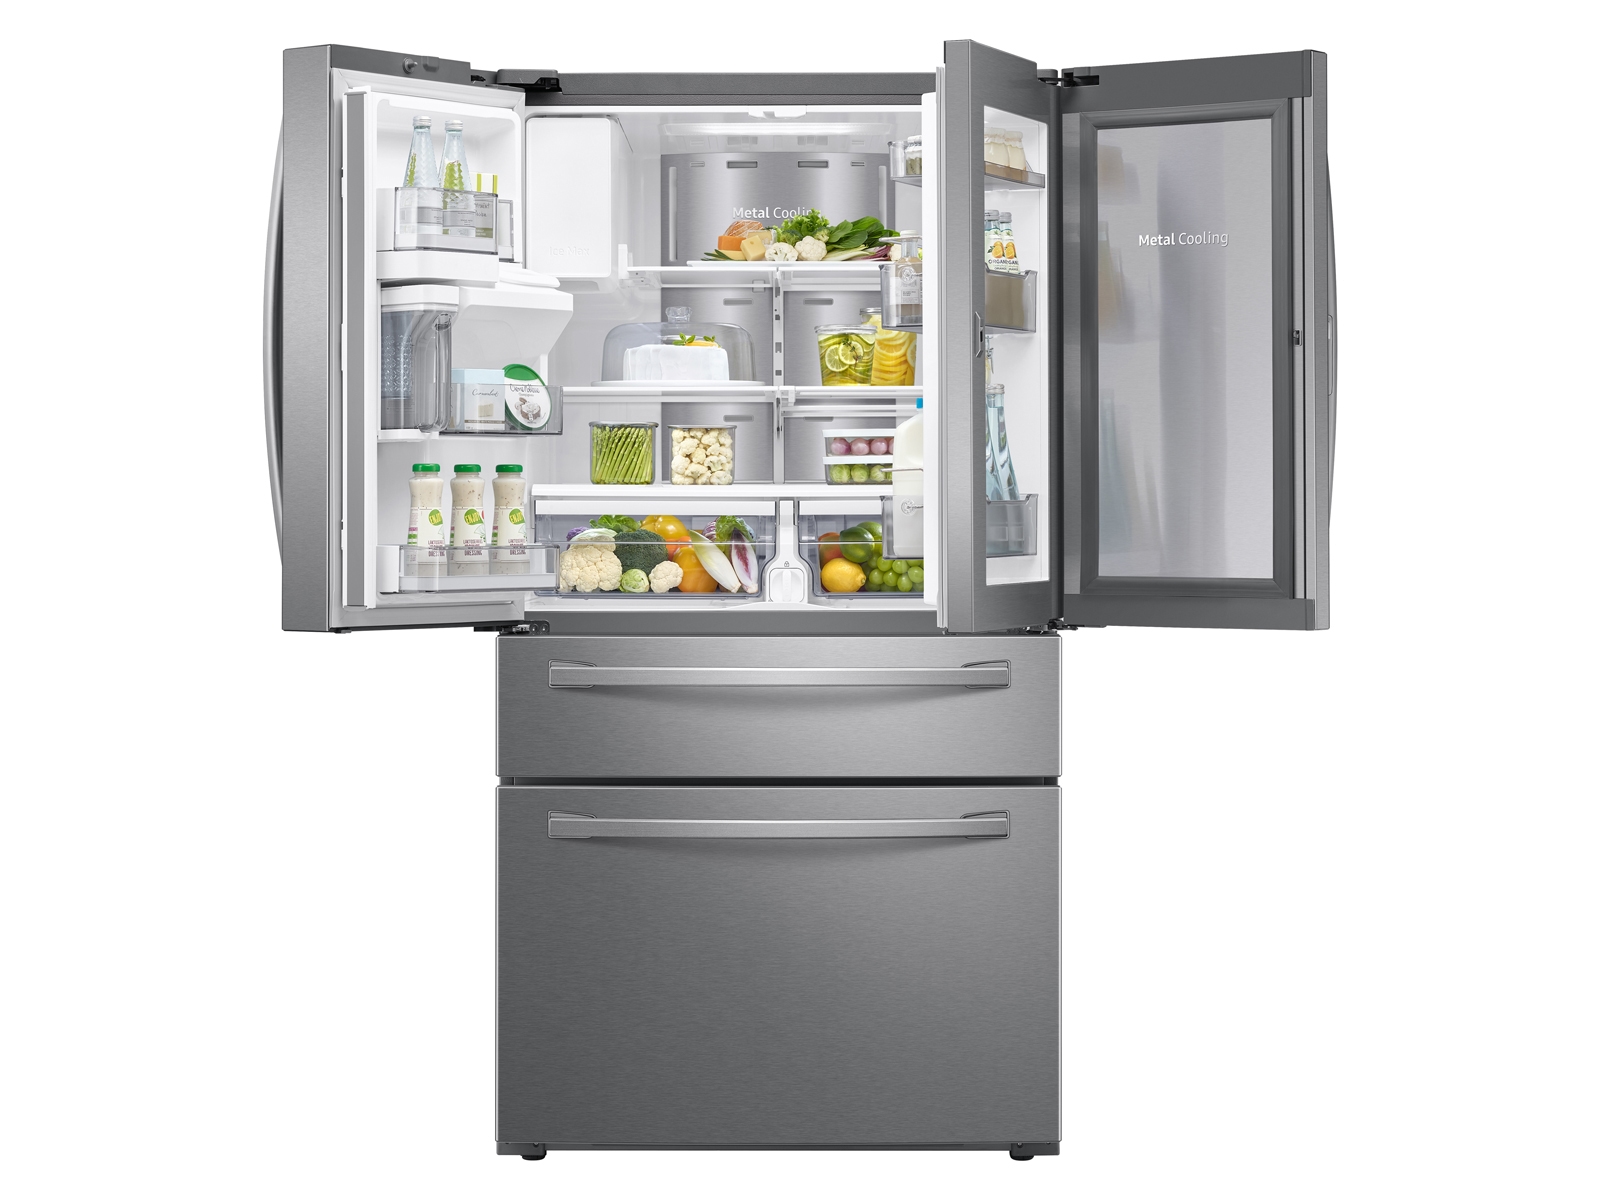 Maxx Ice Self-Contained Ice Machine, 110 lbs with 35 lb Built-in